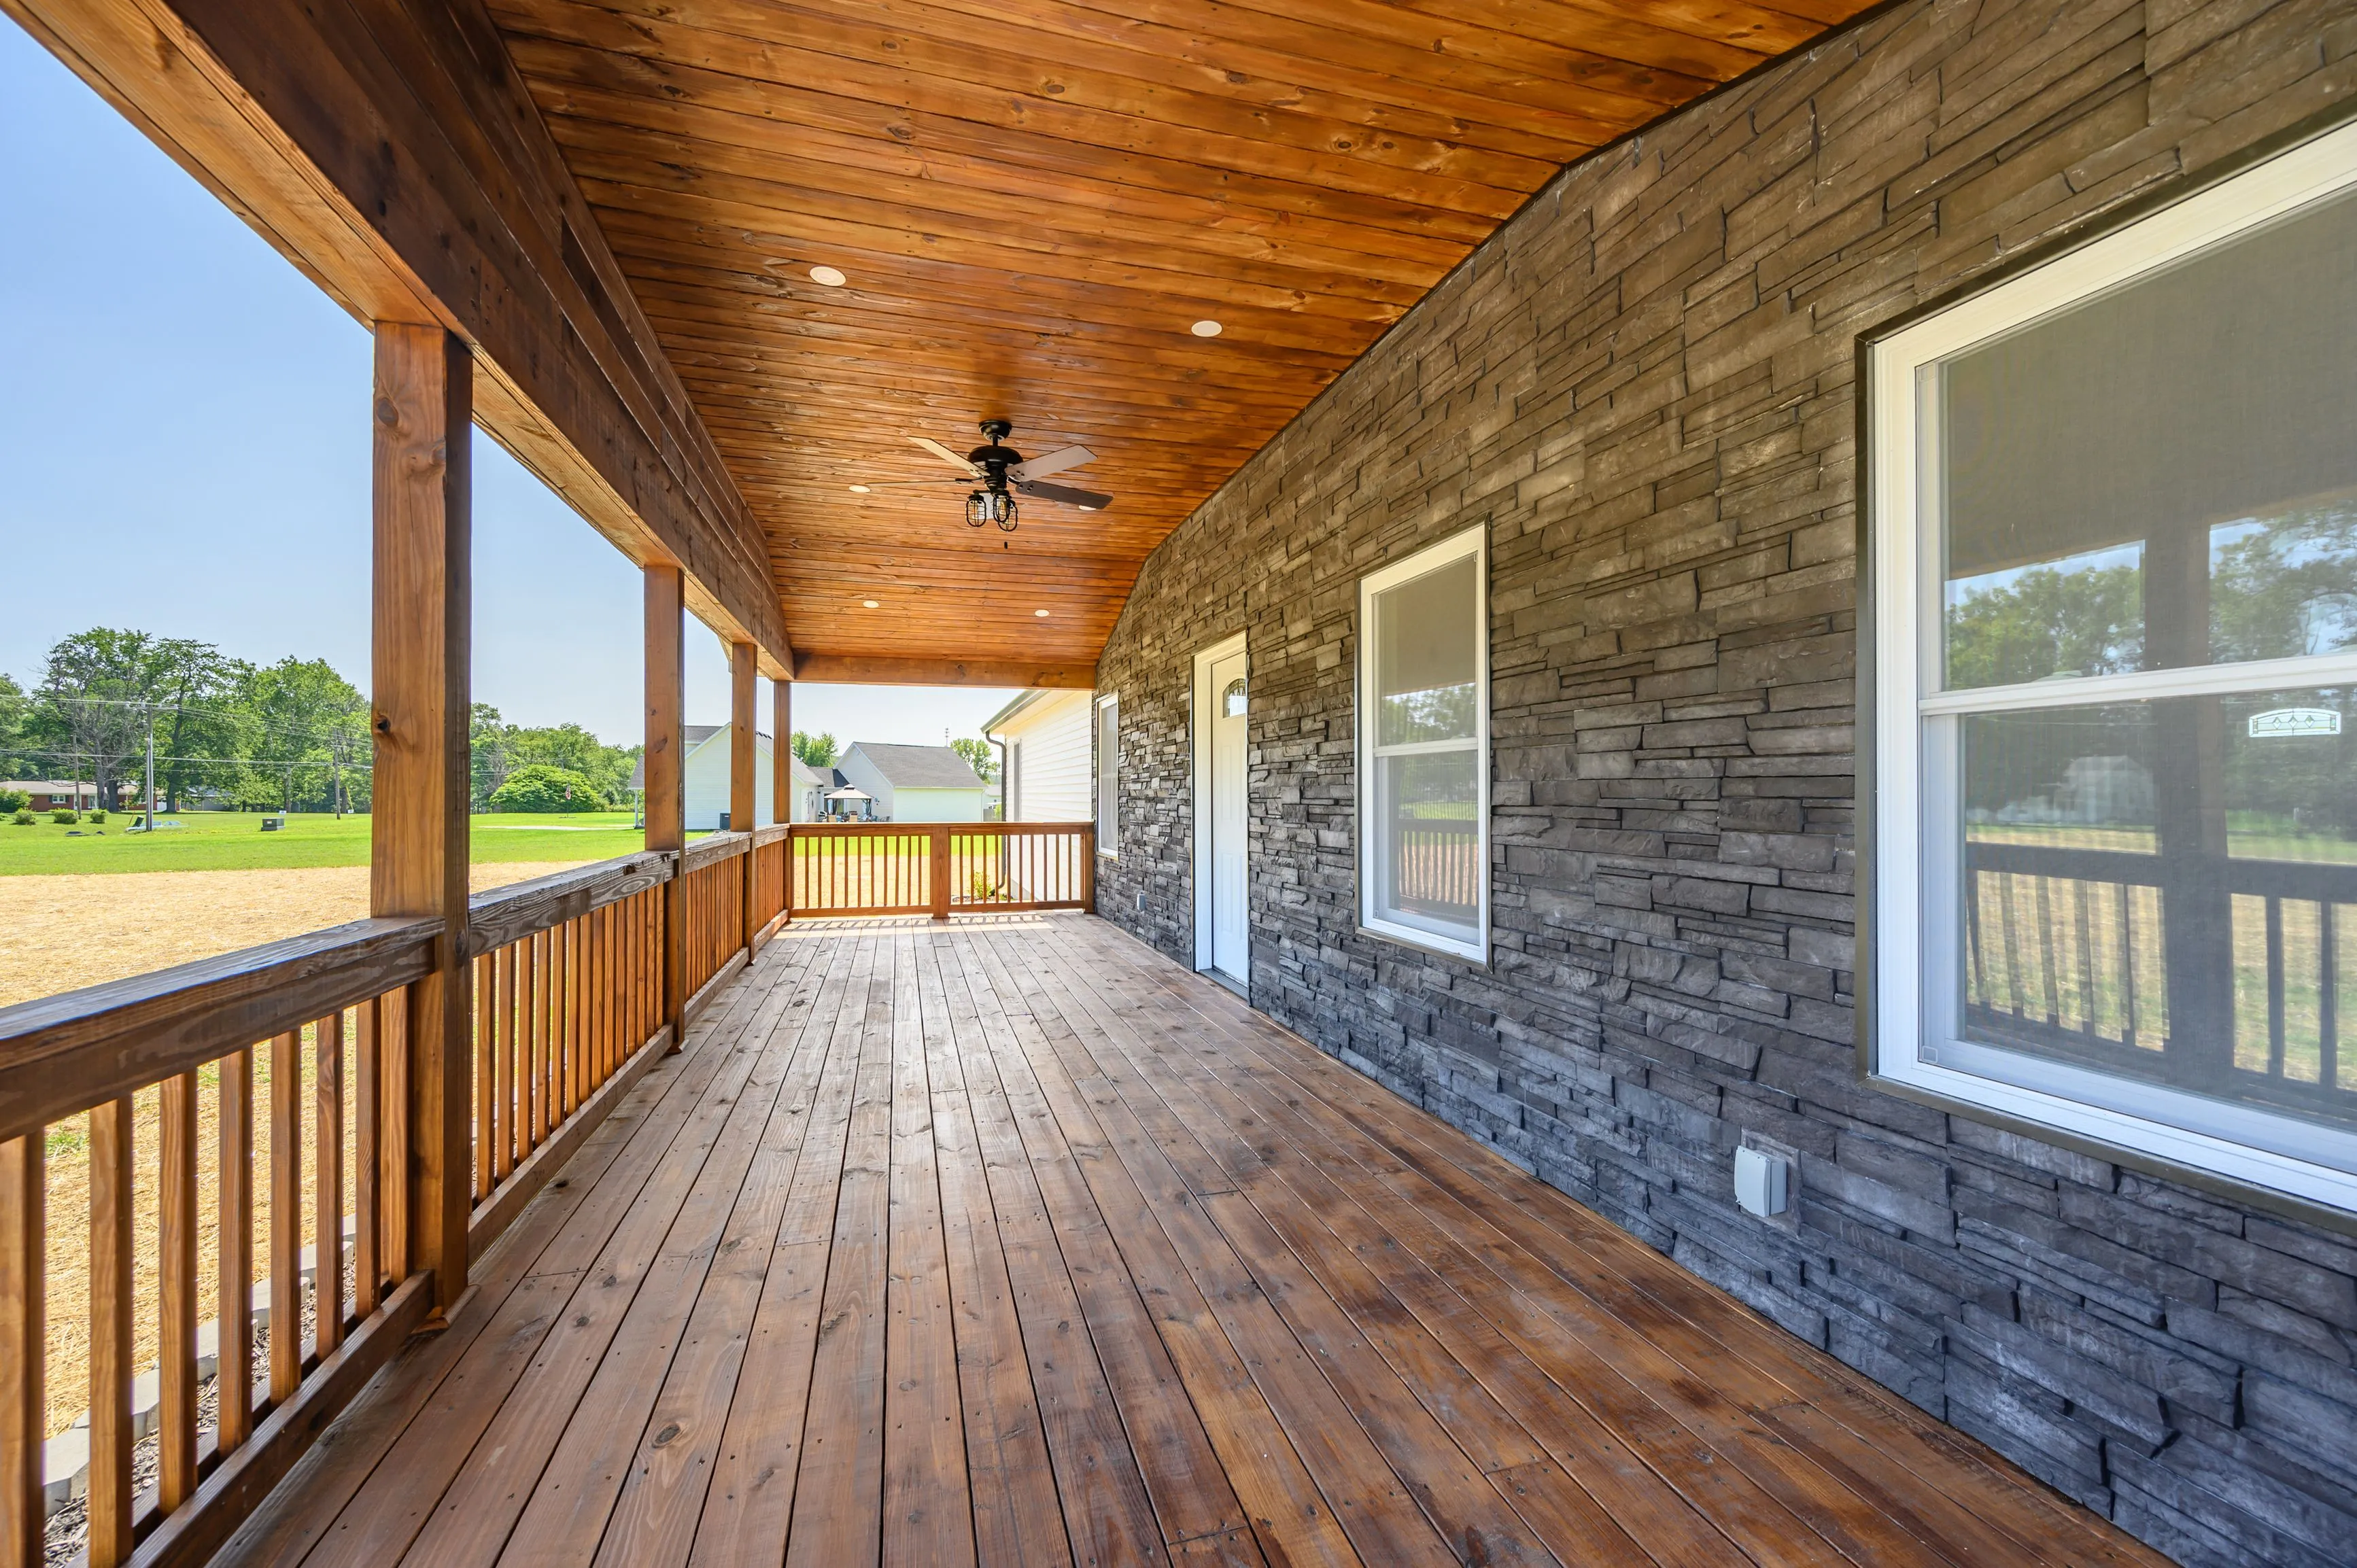 Spacious wooden porch with a natural wood ceiling, stone accent wall, ceiling fan, and a view of a sunny backyard.